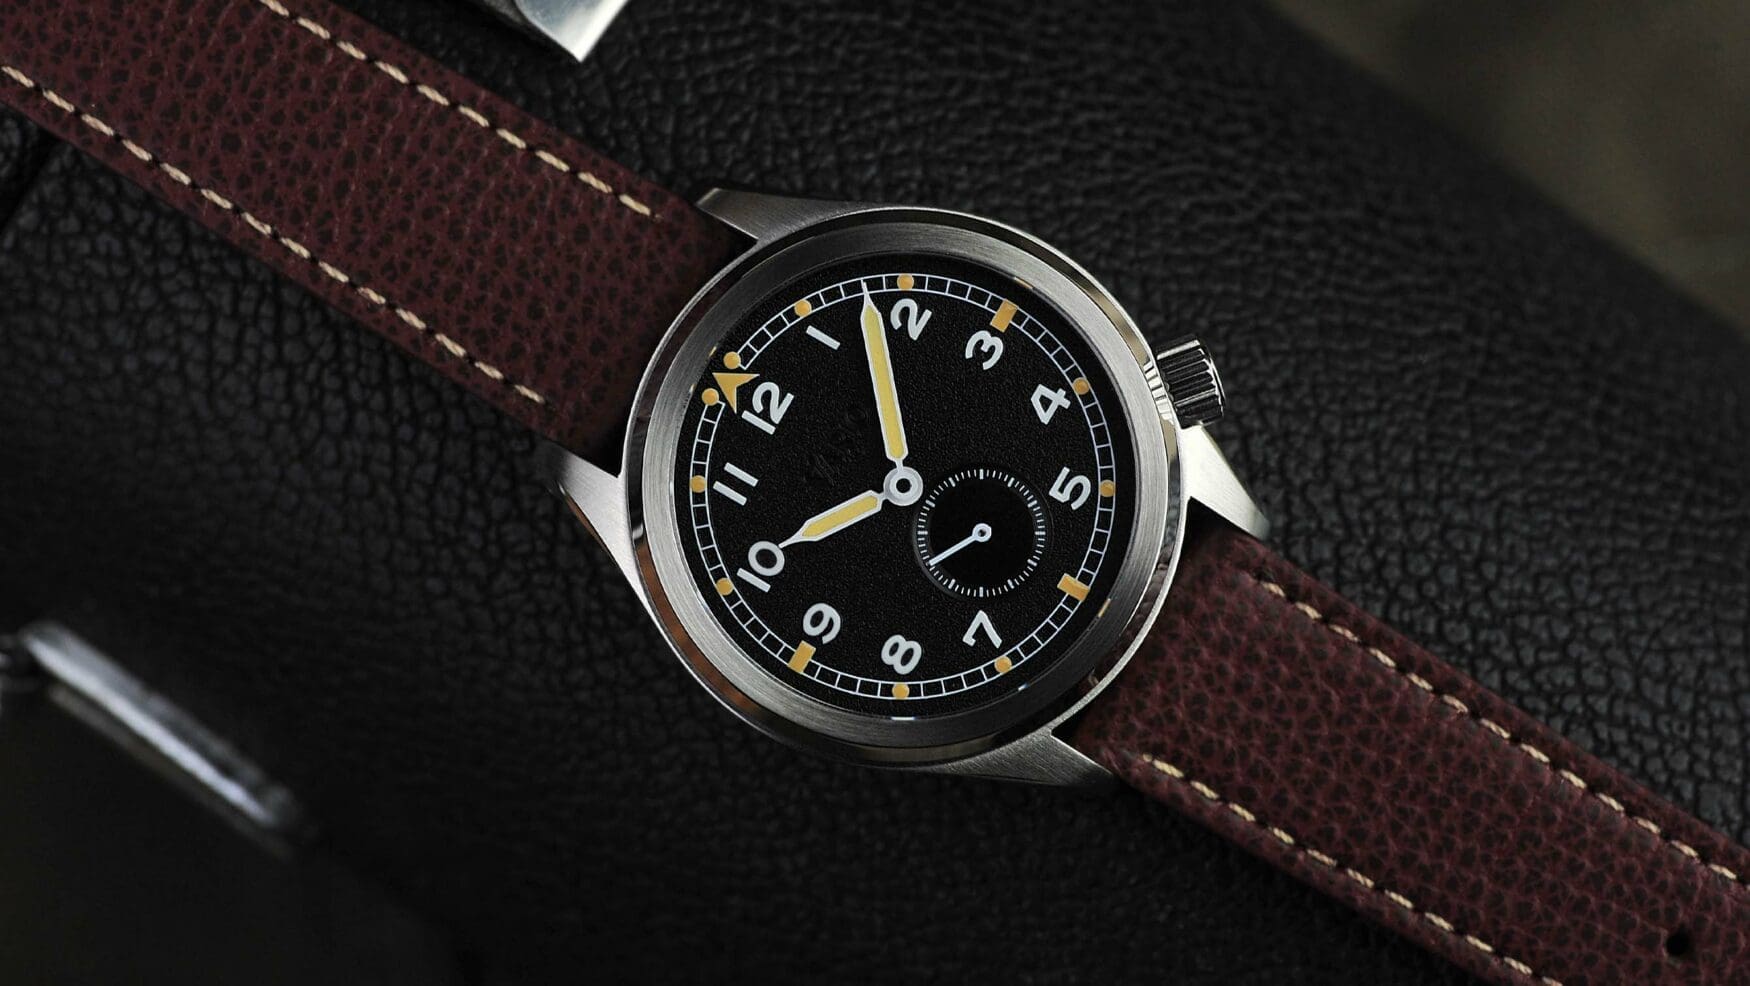 MICRO MONDAYS: The Vario 1945 D12 Field Watch delivers vintage vibes for a bargain price